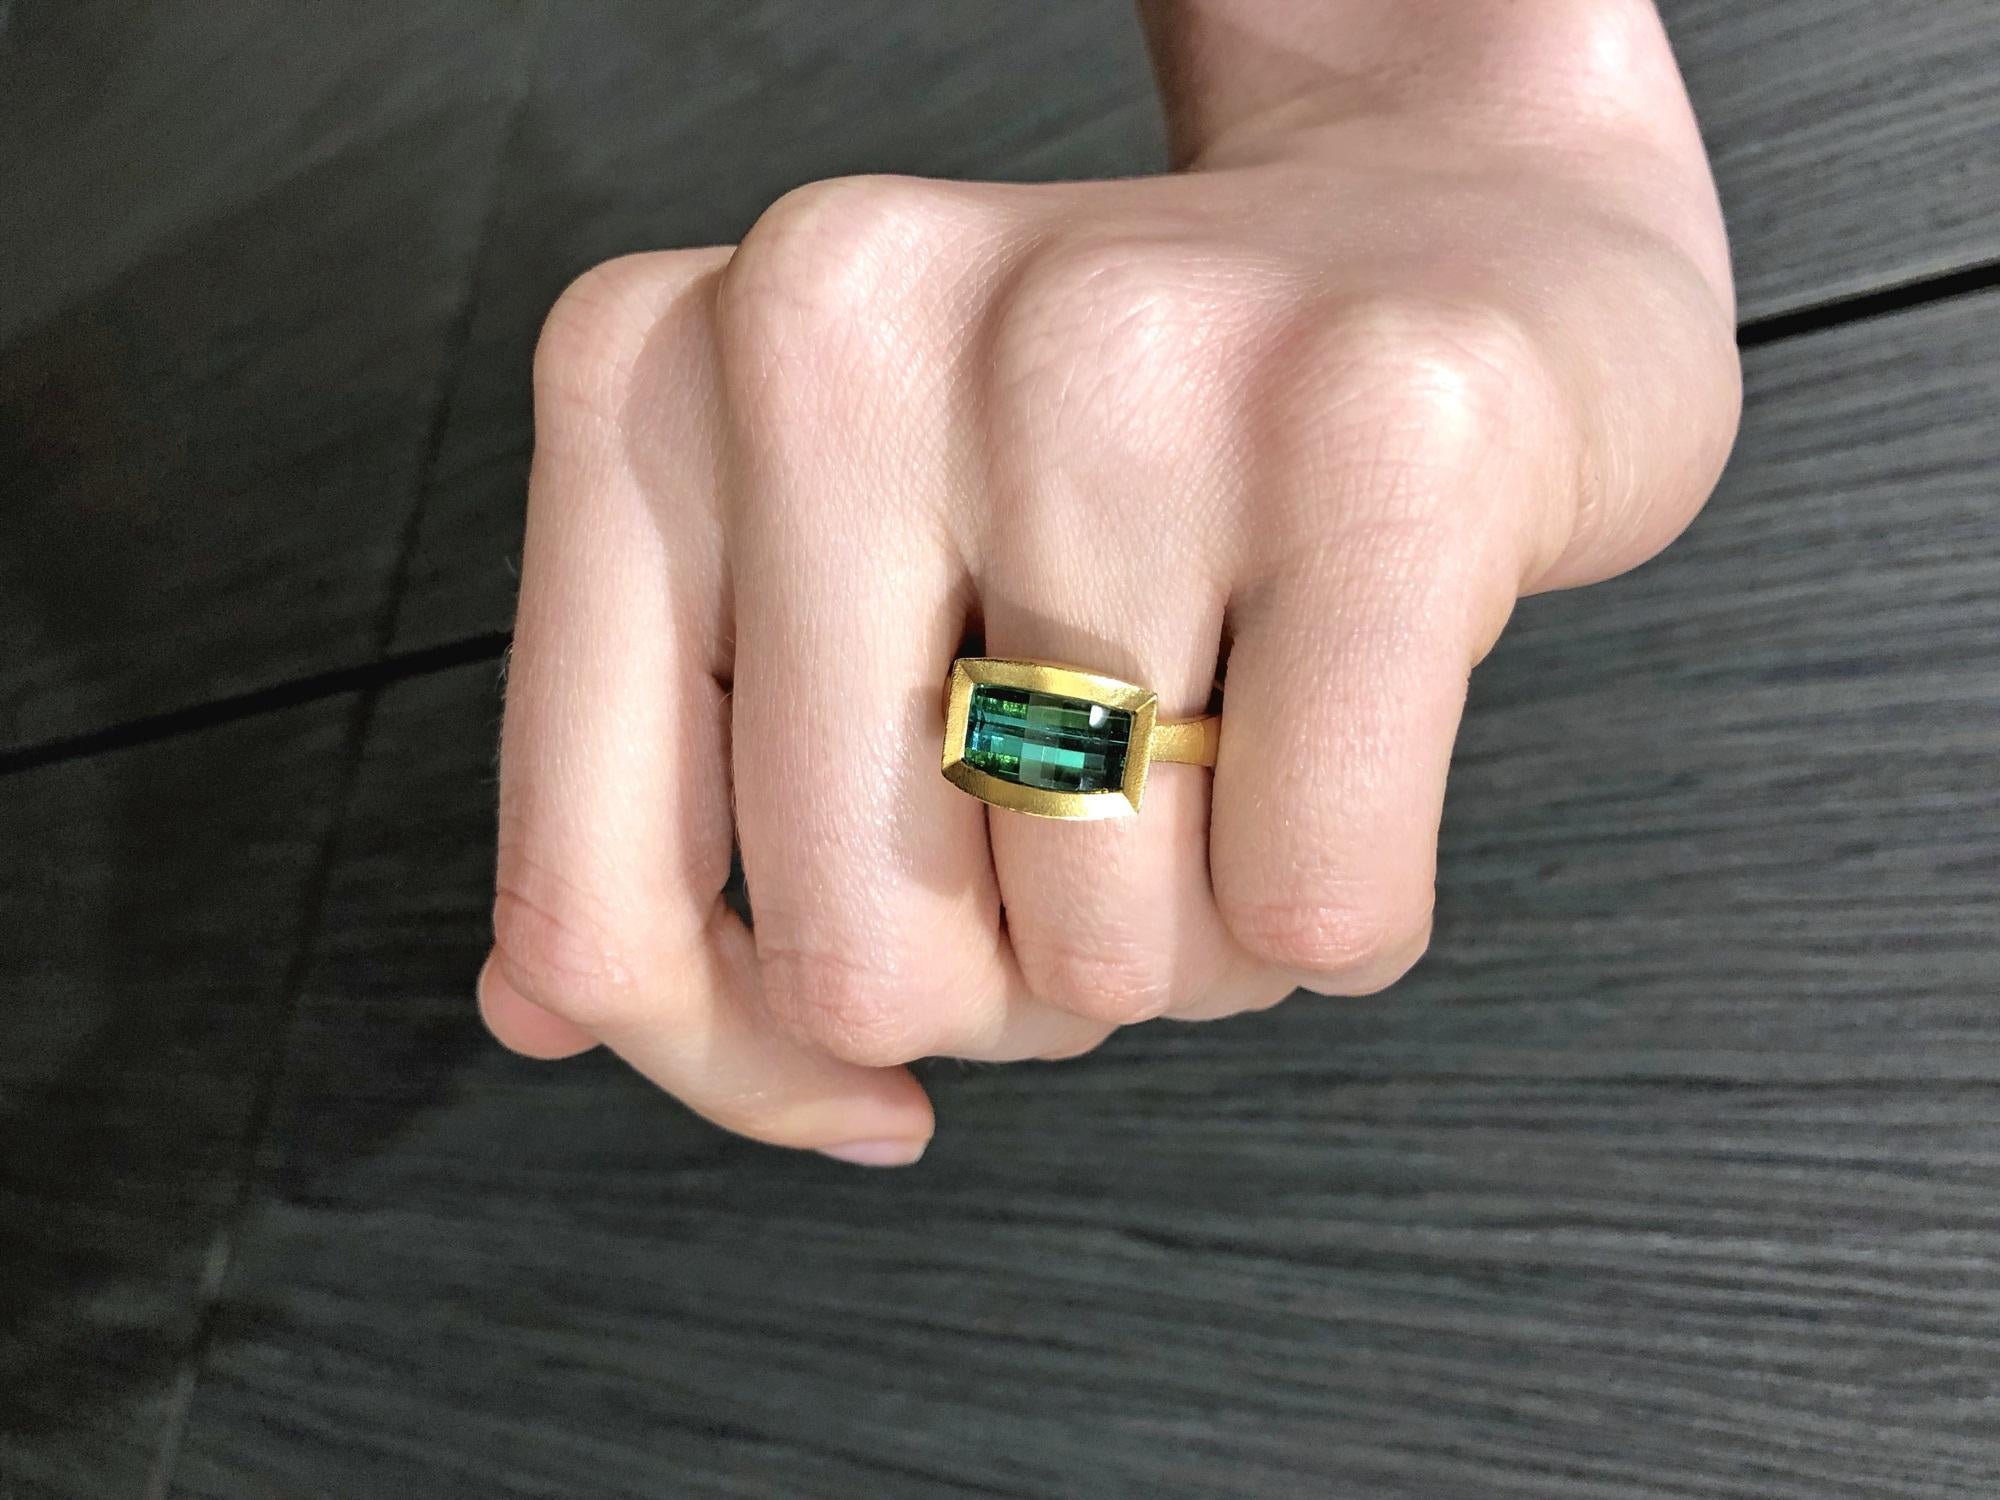 One-of-a-Kind Ring handcrafted by jewelry artist Devta Doolan in his signature 22k yellow gold finish with a horizontal bezel-set bluish-green tourmaline custom-cut with a shimmering geometric grid. Spectacular color and cut. Size 6.25 (Can be